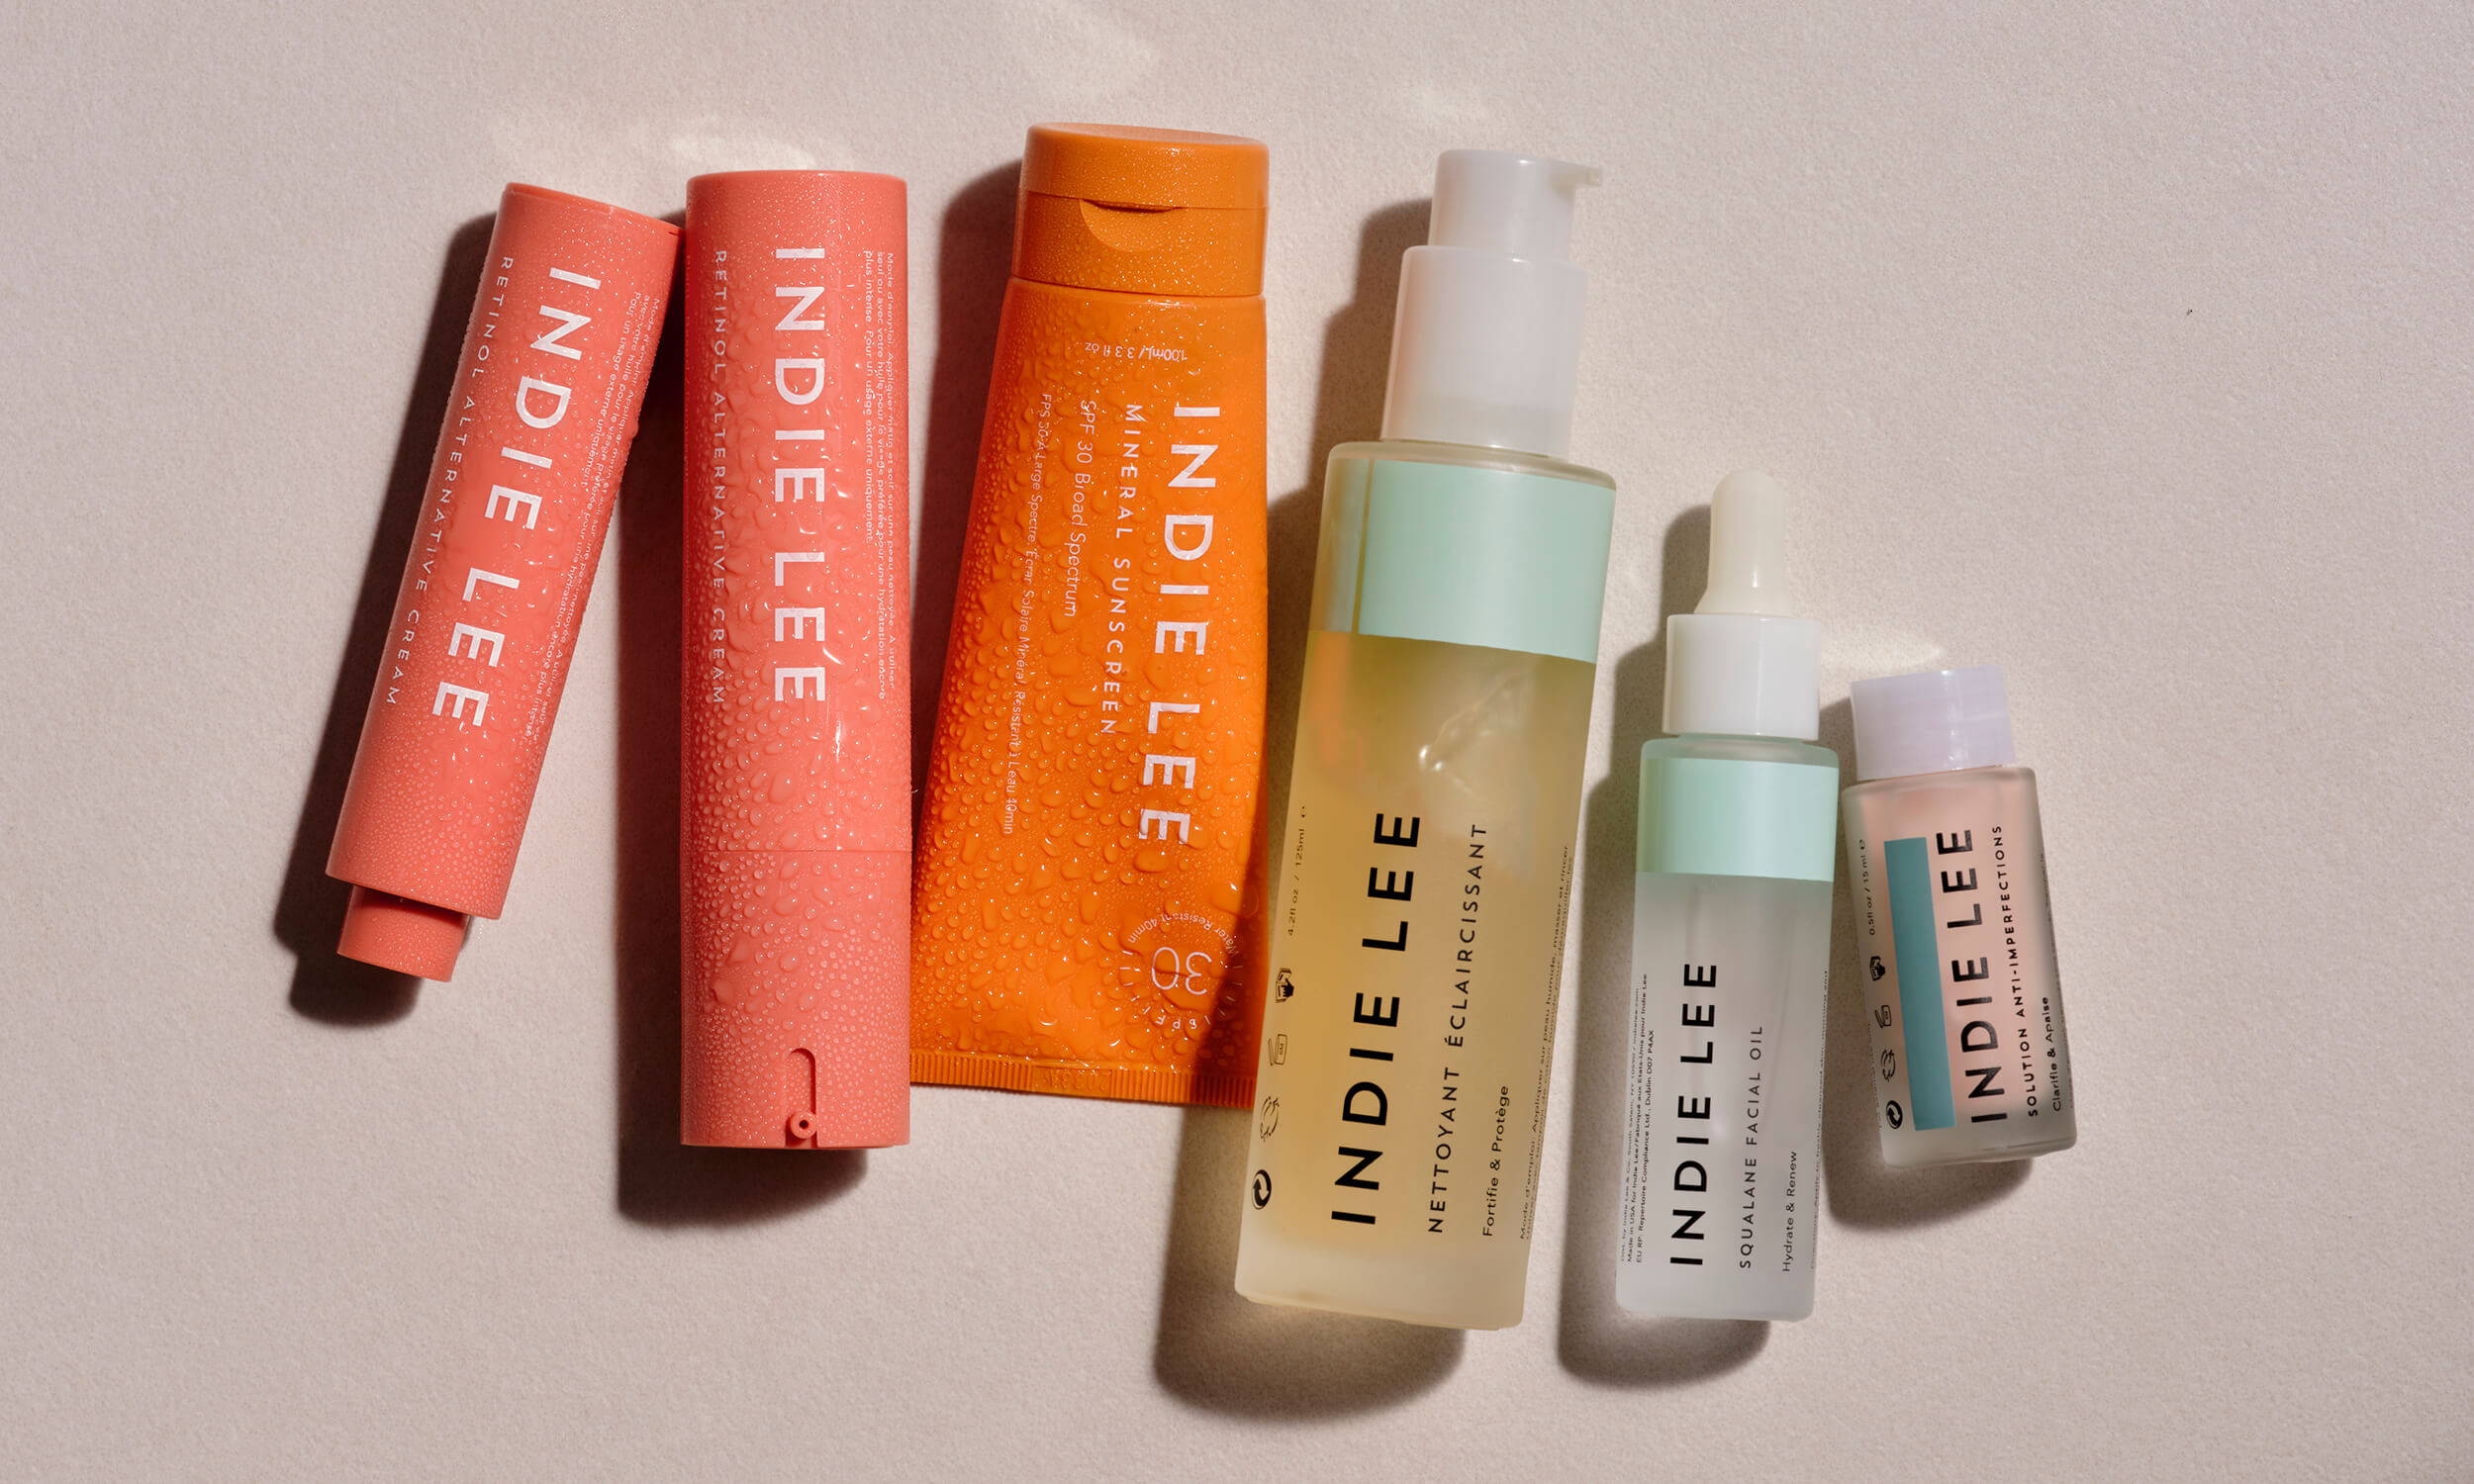 These 7 must-try Indie Lee skincare products - Oh My Cream